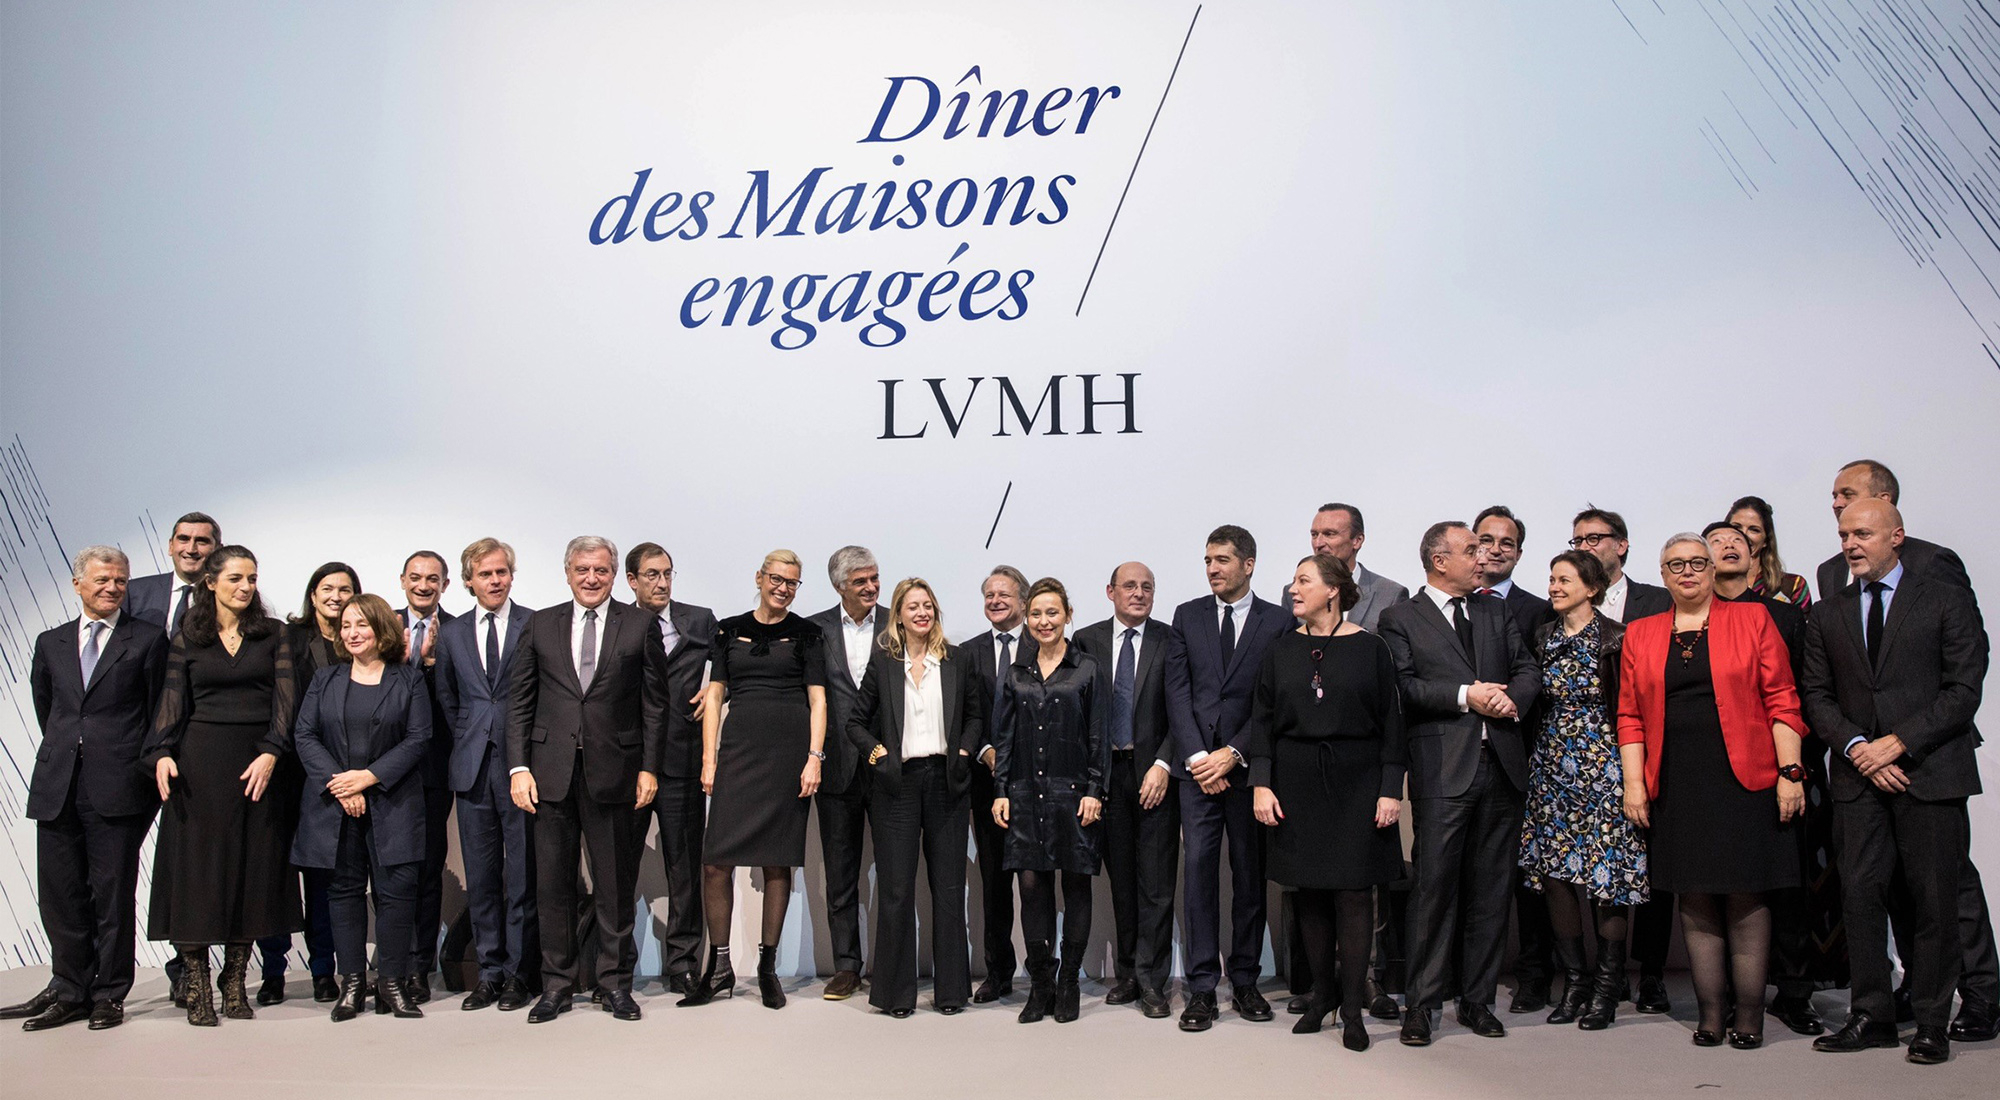 The LVMH Group and 30 Maisons reaffirm their social commitment for